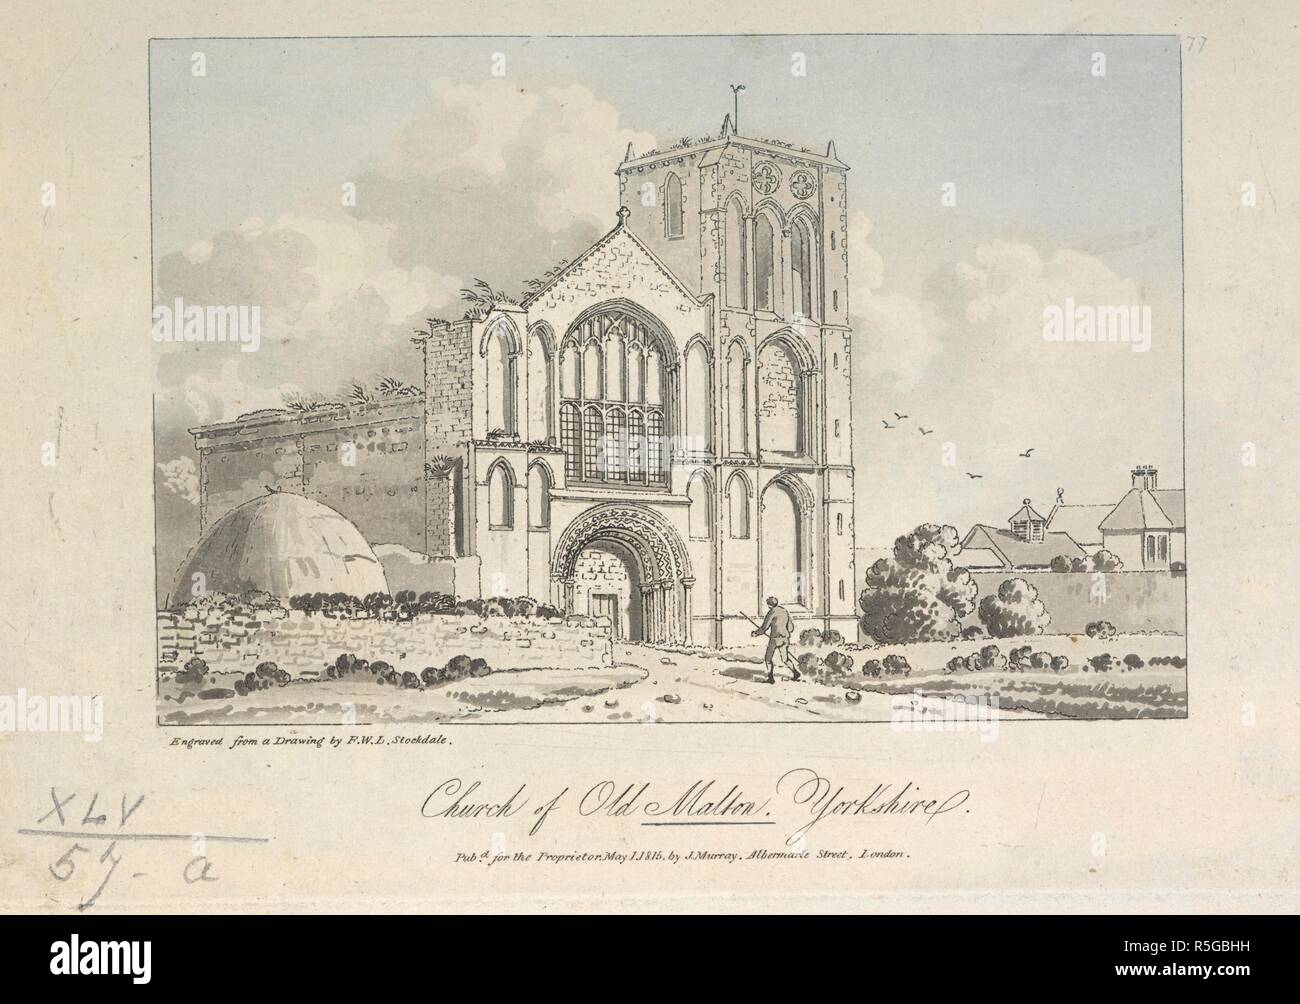 Church of Old Malton, Yorkshire. A figure walking towards St Mary's Priory Church, Old Malton; buildings and trees in the distance to the right. [London] : Pubd for the Proprietor May 1 1815 by J. Murray, Albermarle Strret, London., [May 1 1815]. Source: Maps K.Top.45.57.a. Language: English. Stock Photo